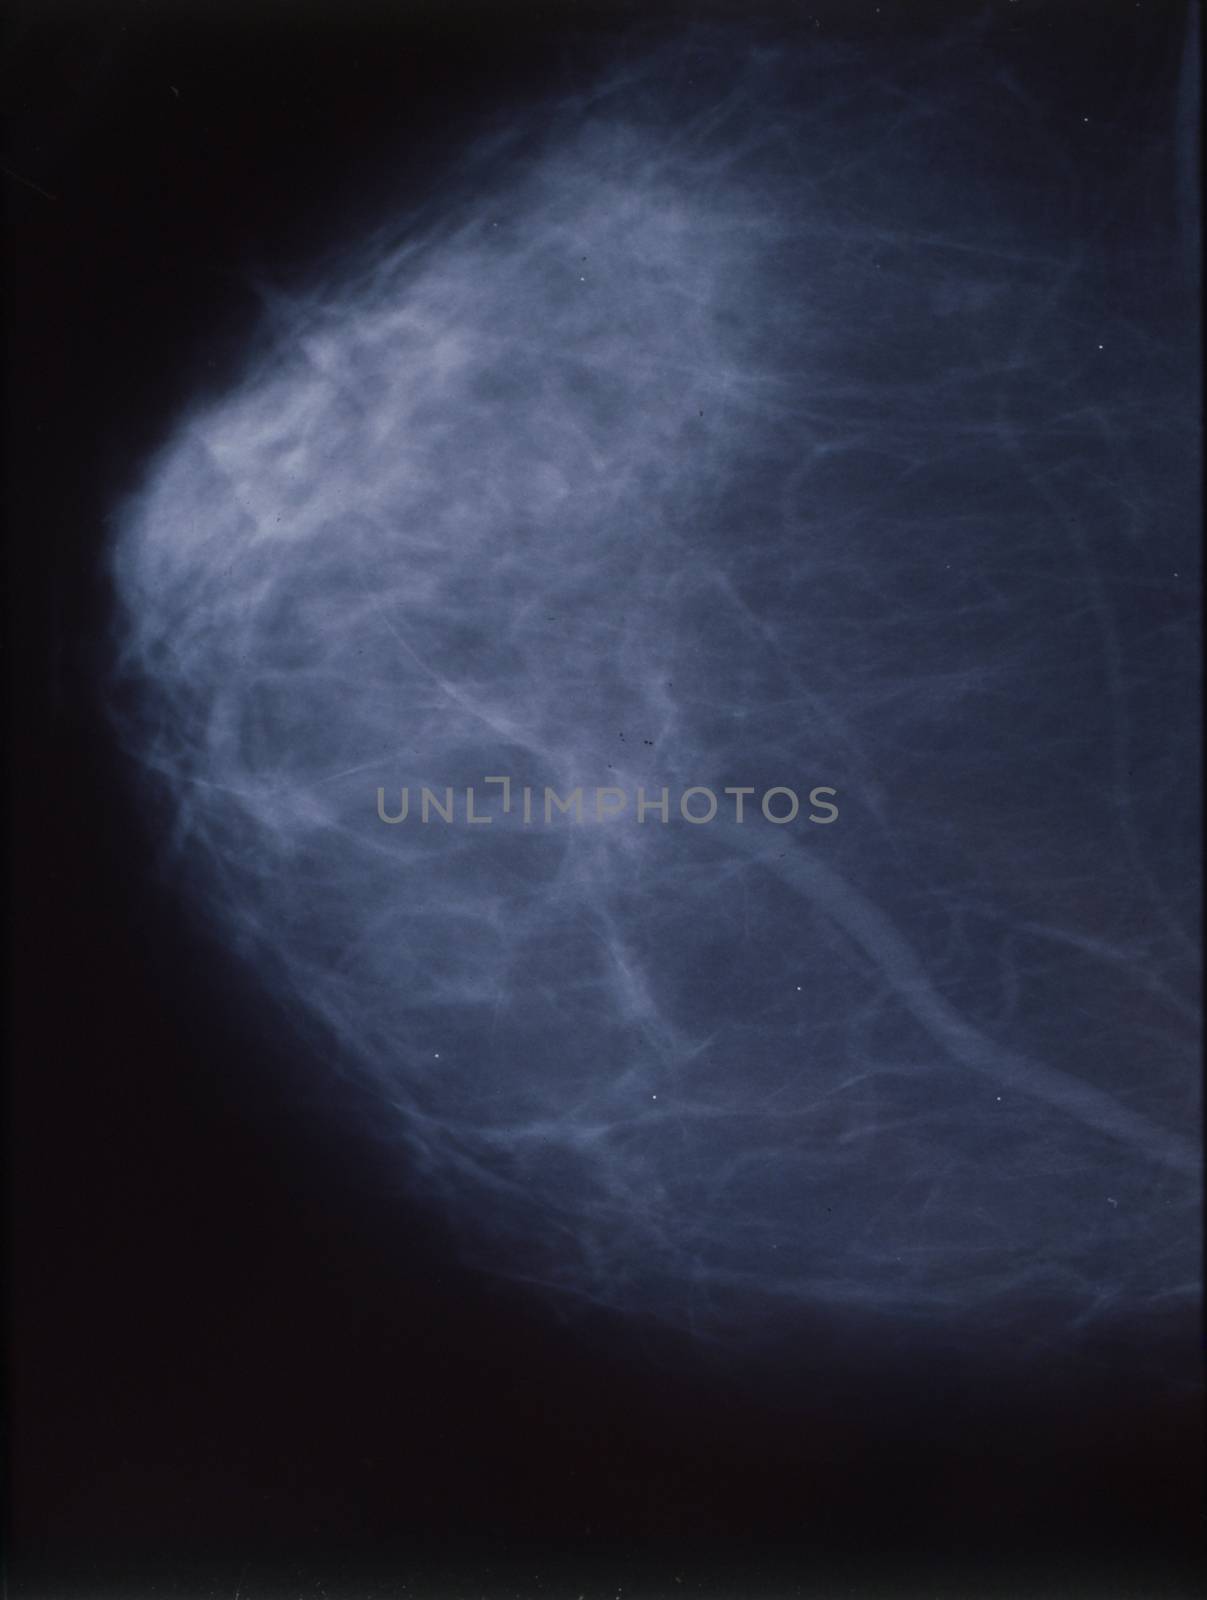 X-ray as mammography of the female breast